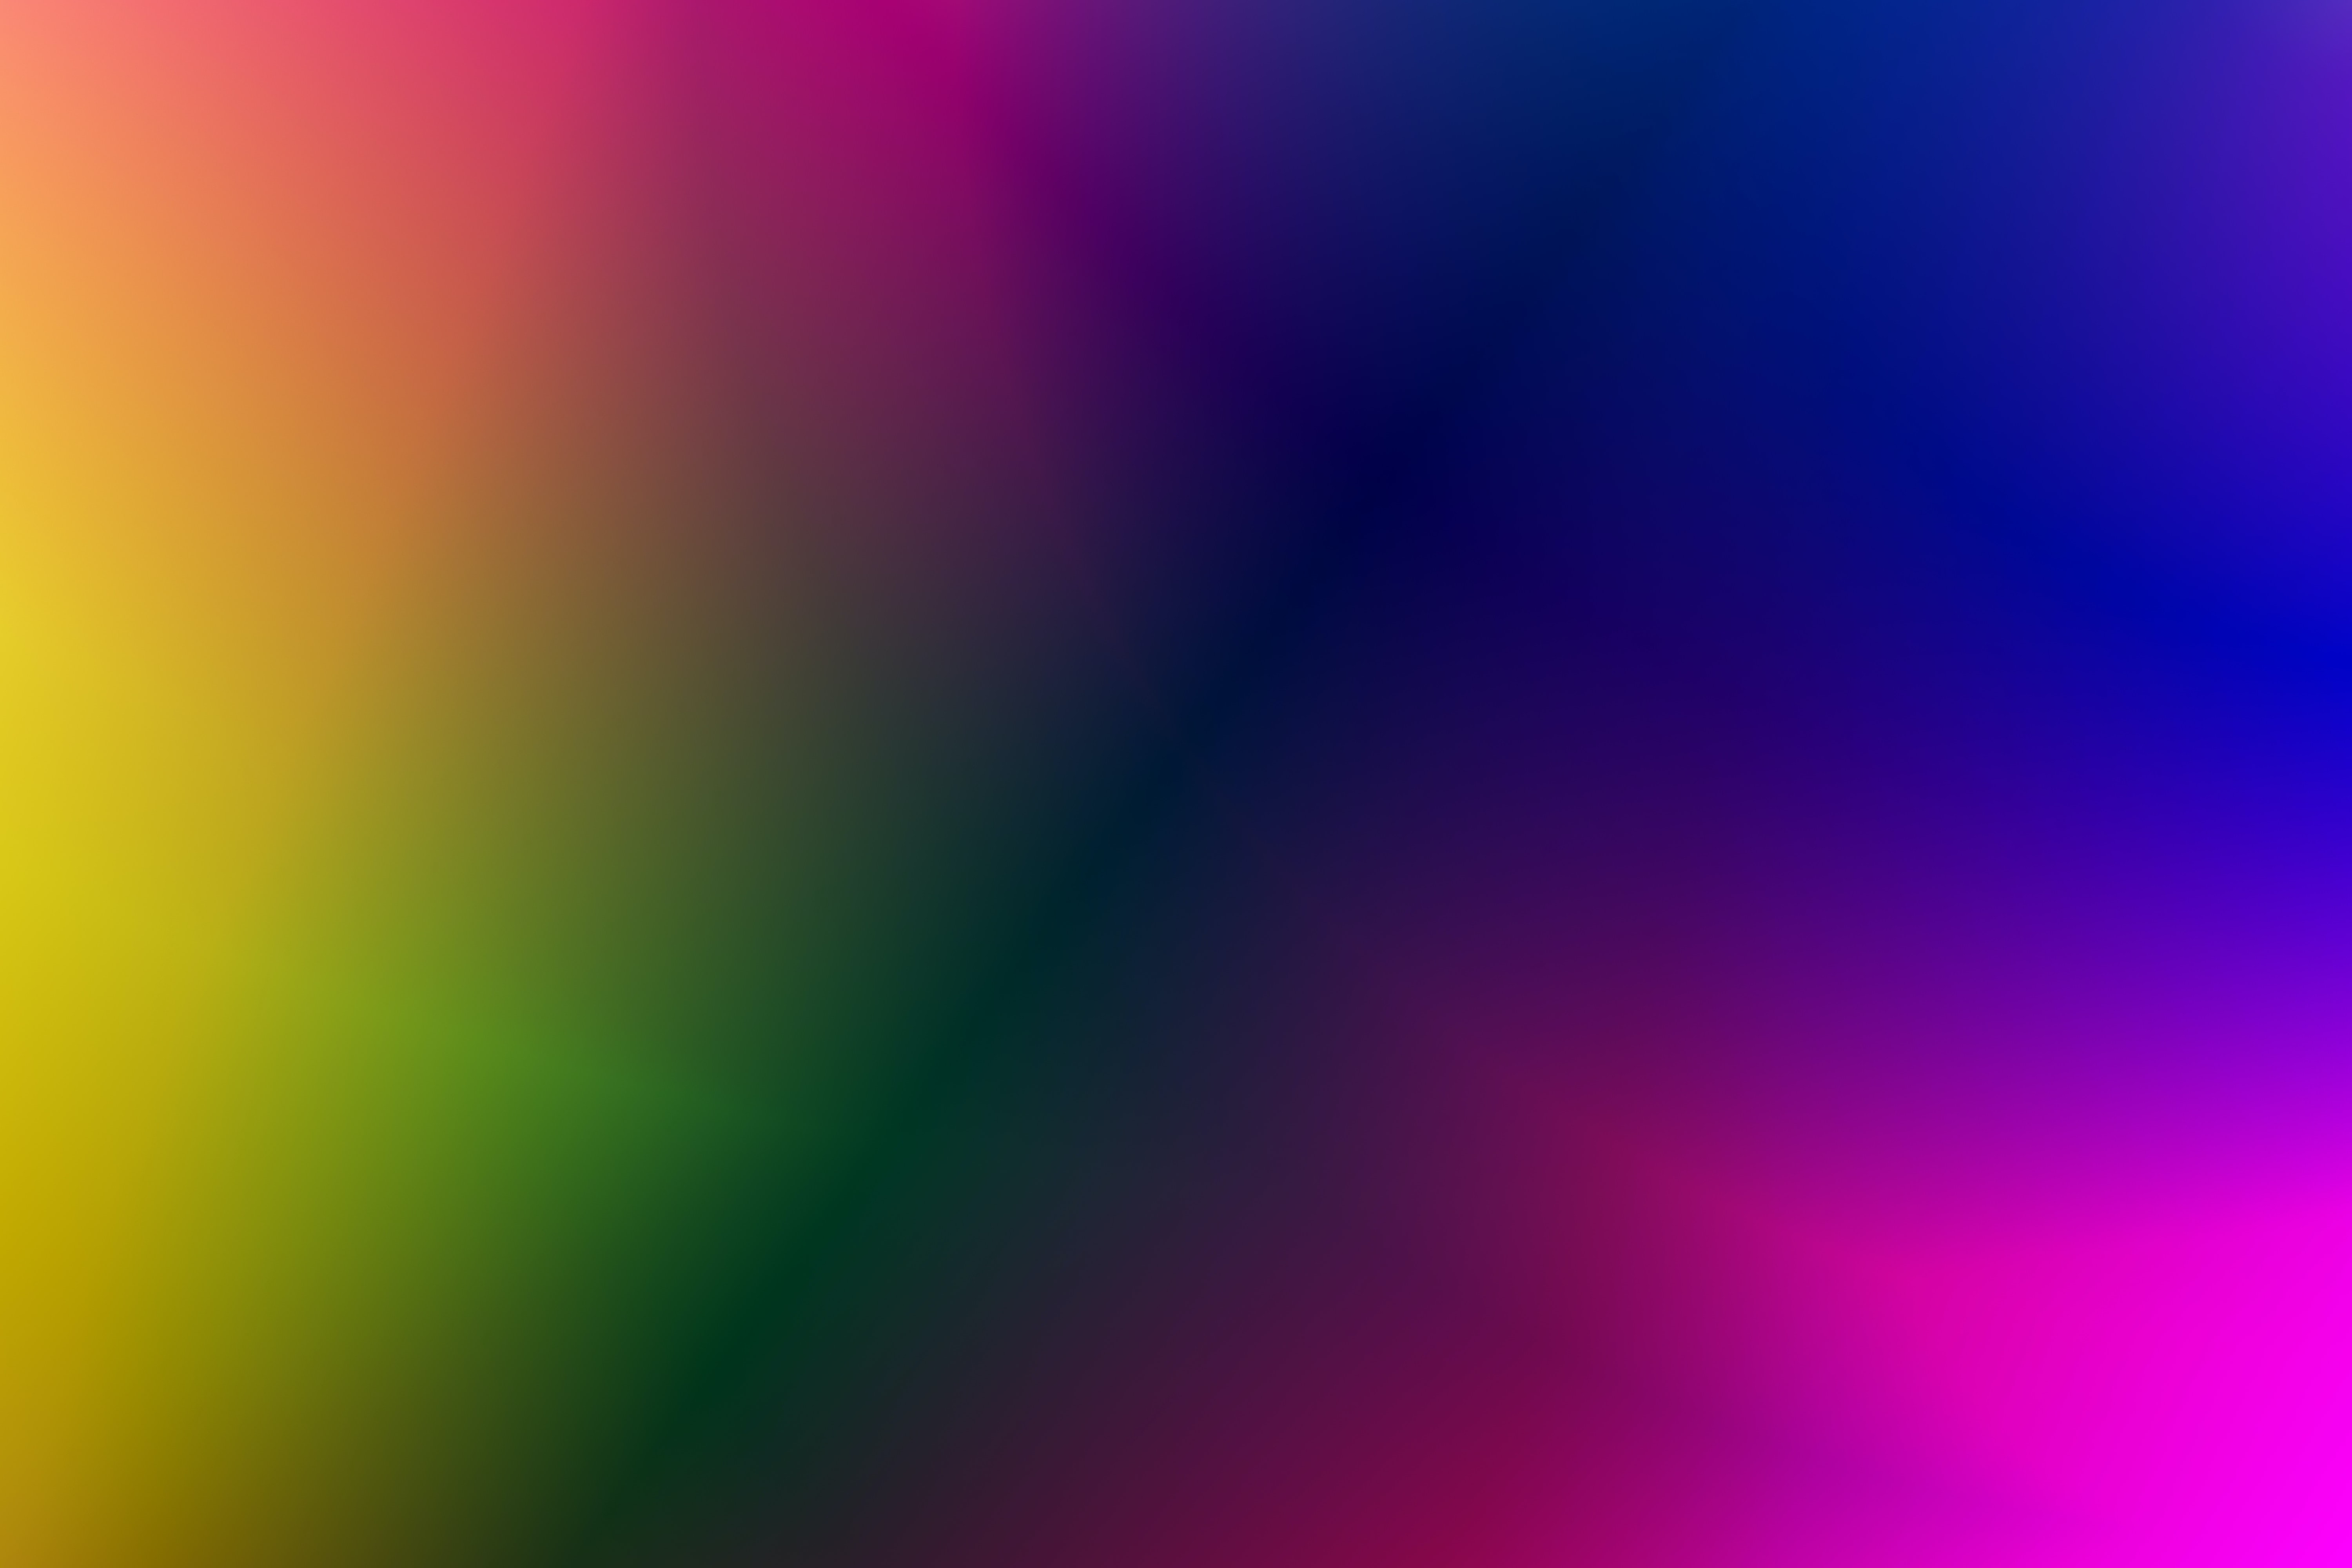 multicolored, abstract, motley, stains, spots, gradient